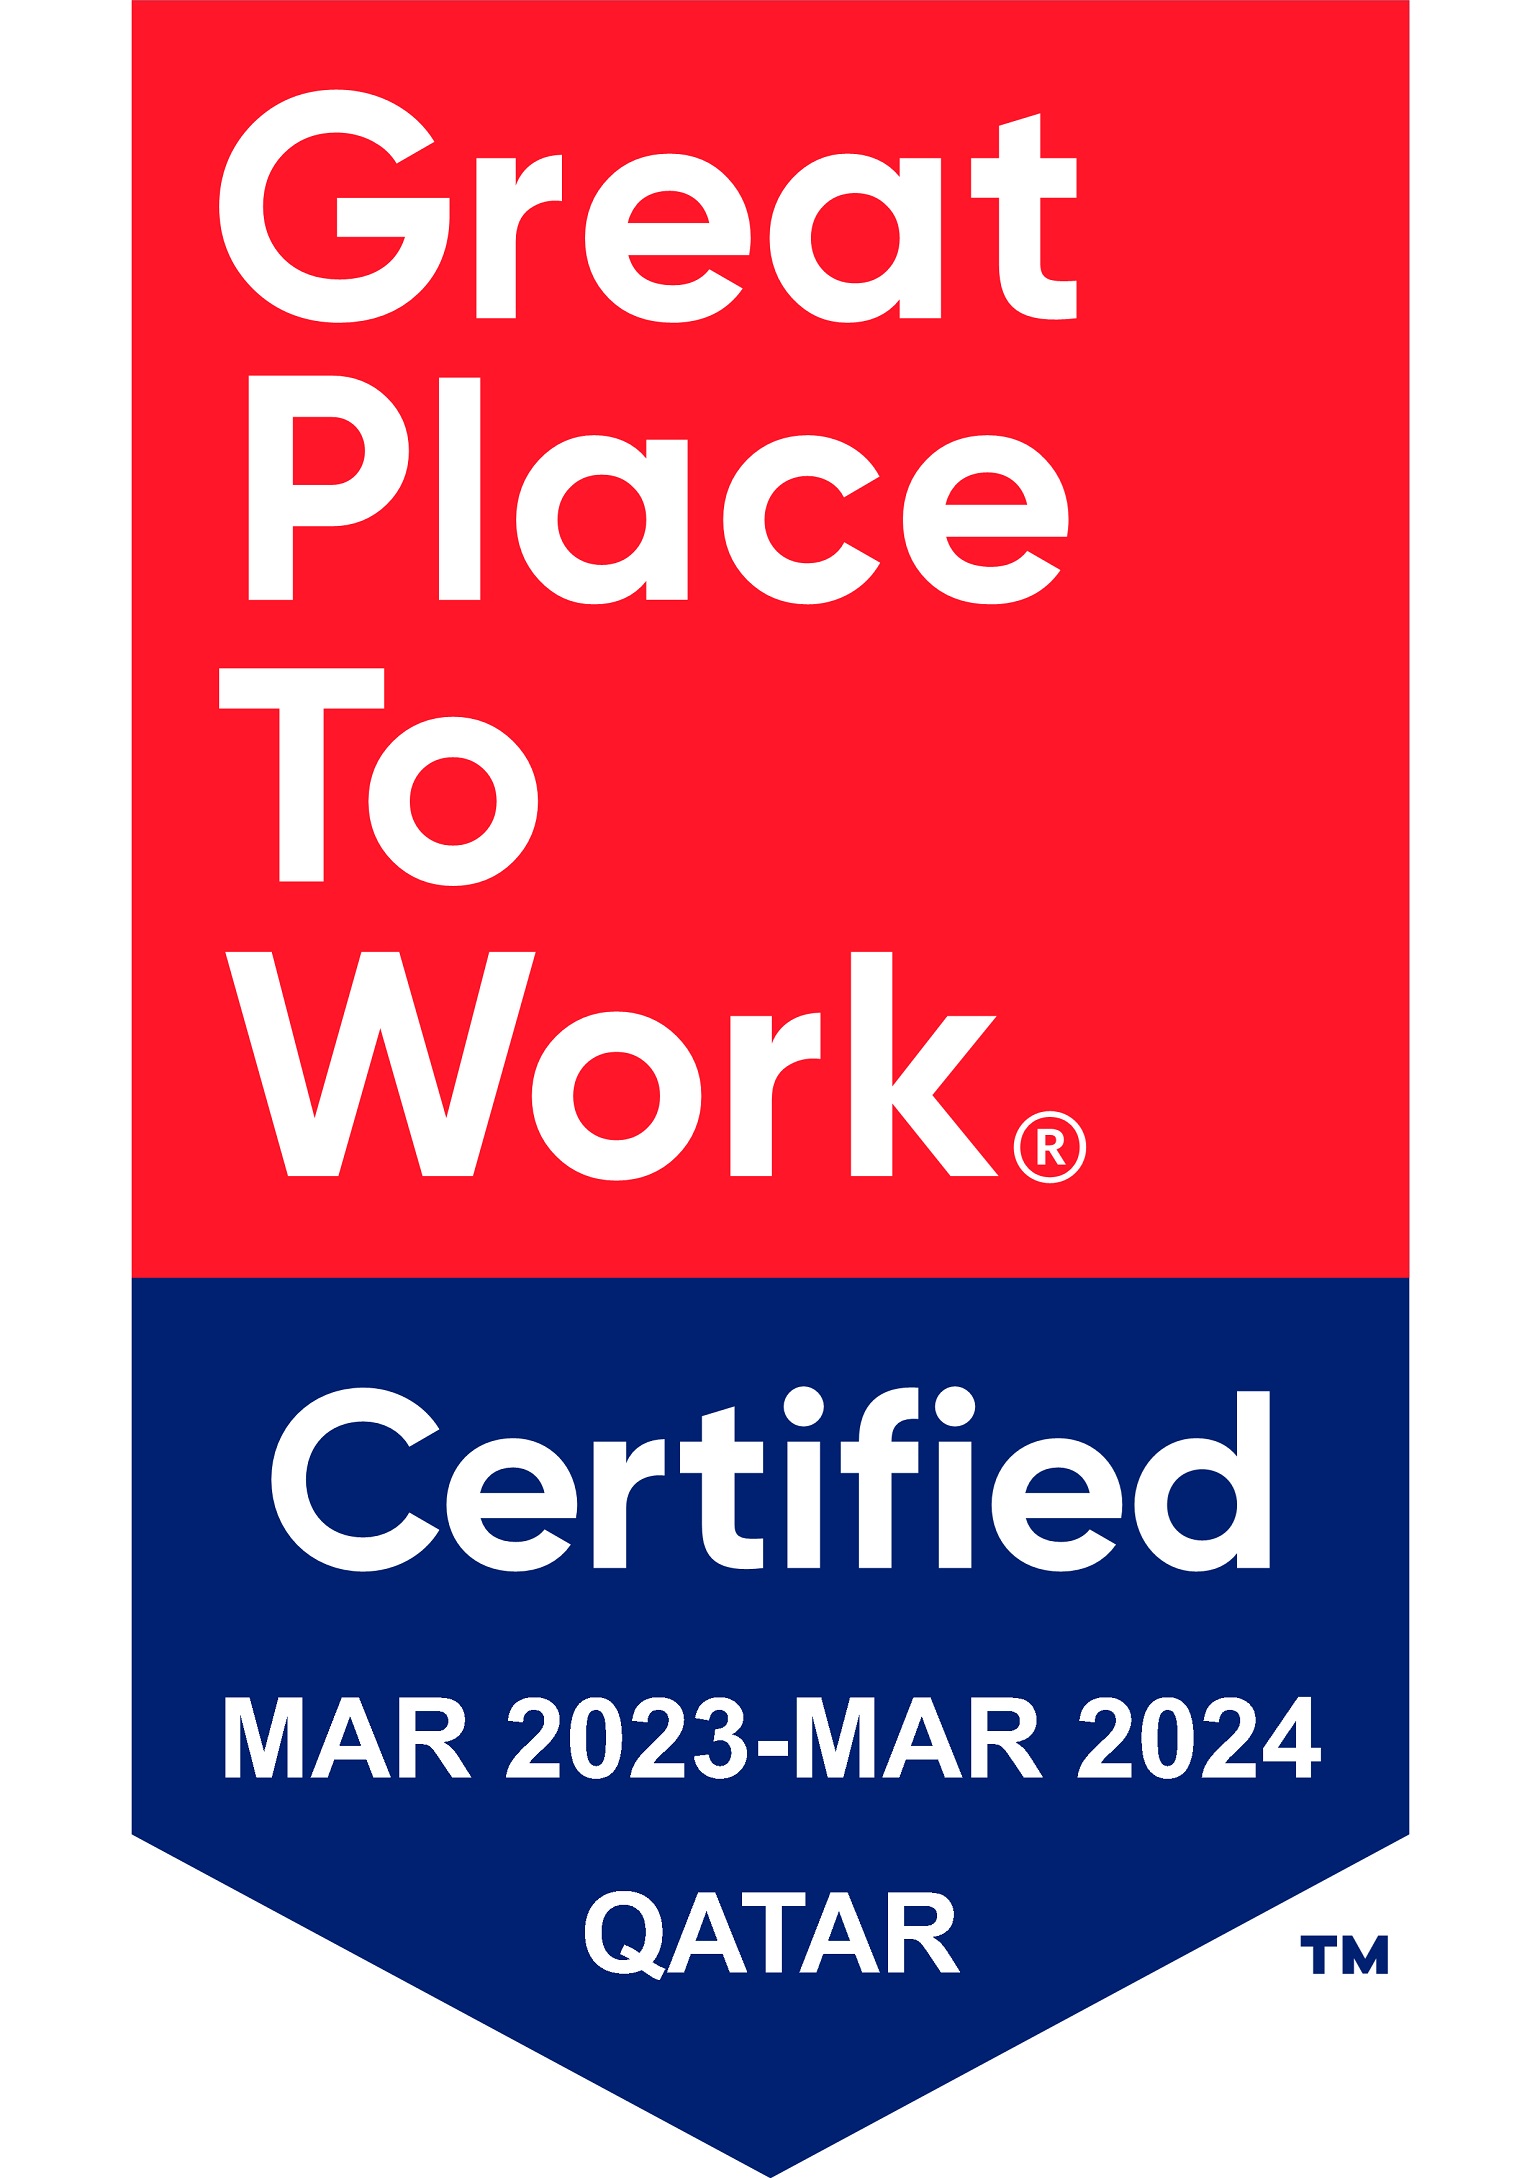 Greate Place to Work Certified